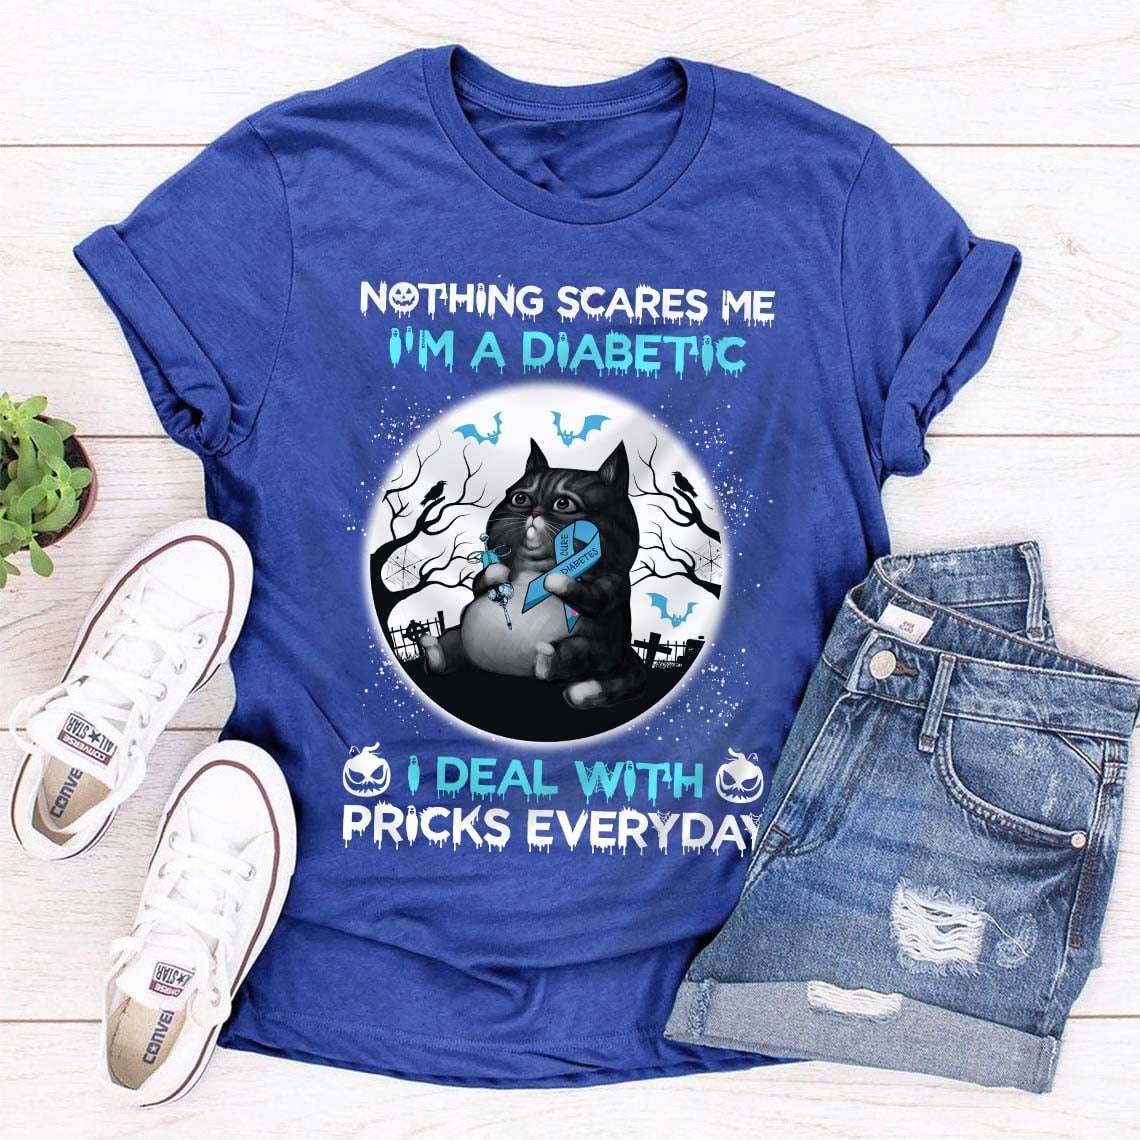 Nothing scares me I'm a diabetic I deal with pricks everyday - Diabetes awareness, black cat in sematary